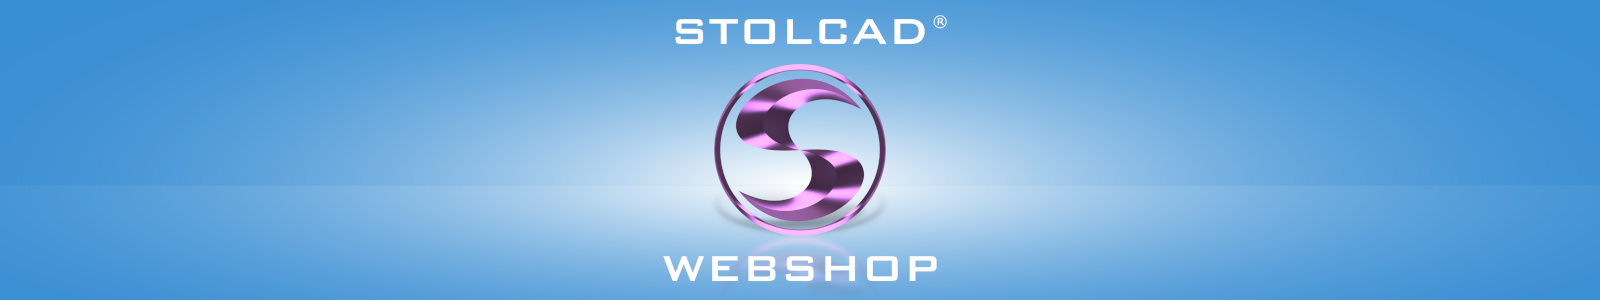 Stolcad Webshop - website for traders to quote windows, doors and roller shutters